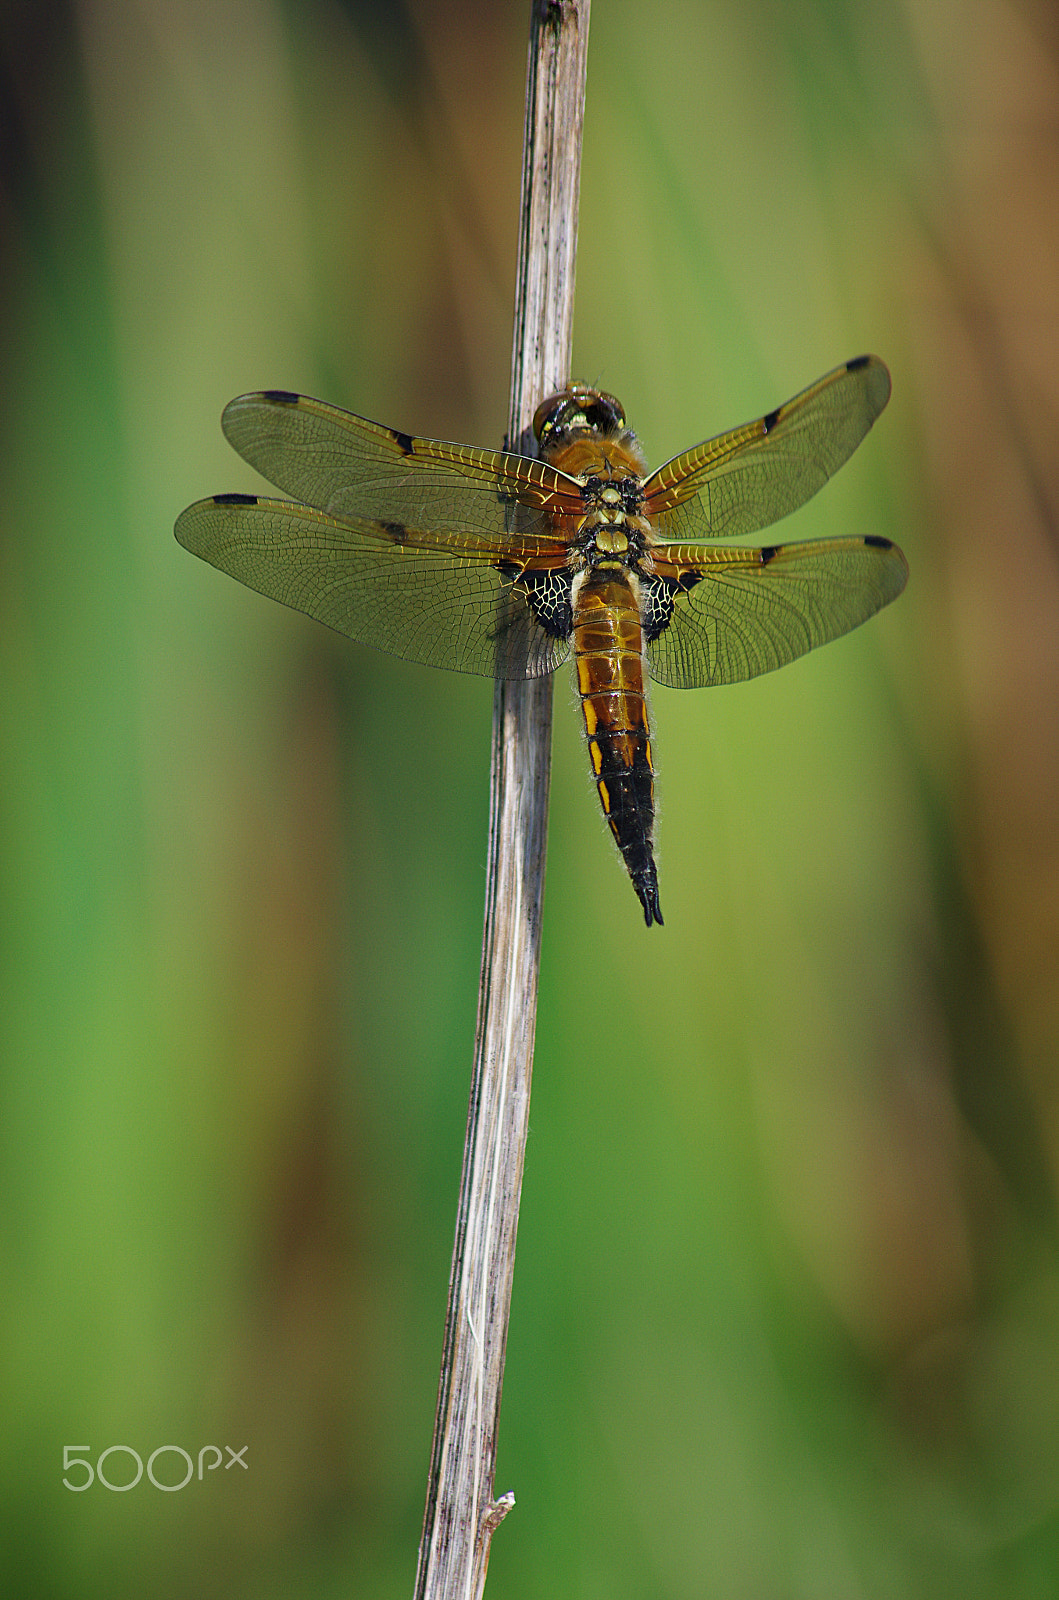 Pentax K-5 + Pentax smc DA 55-300mm F4.0-5.8 ED sample photo. Four spotted chaser dragonfly photography